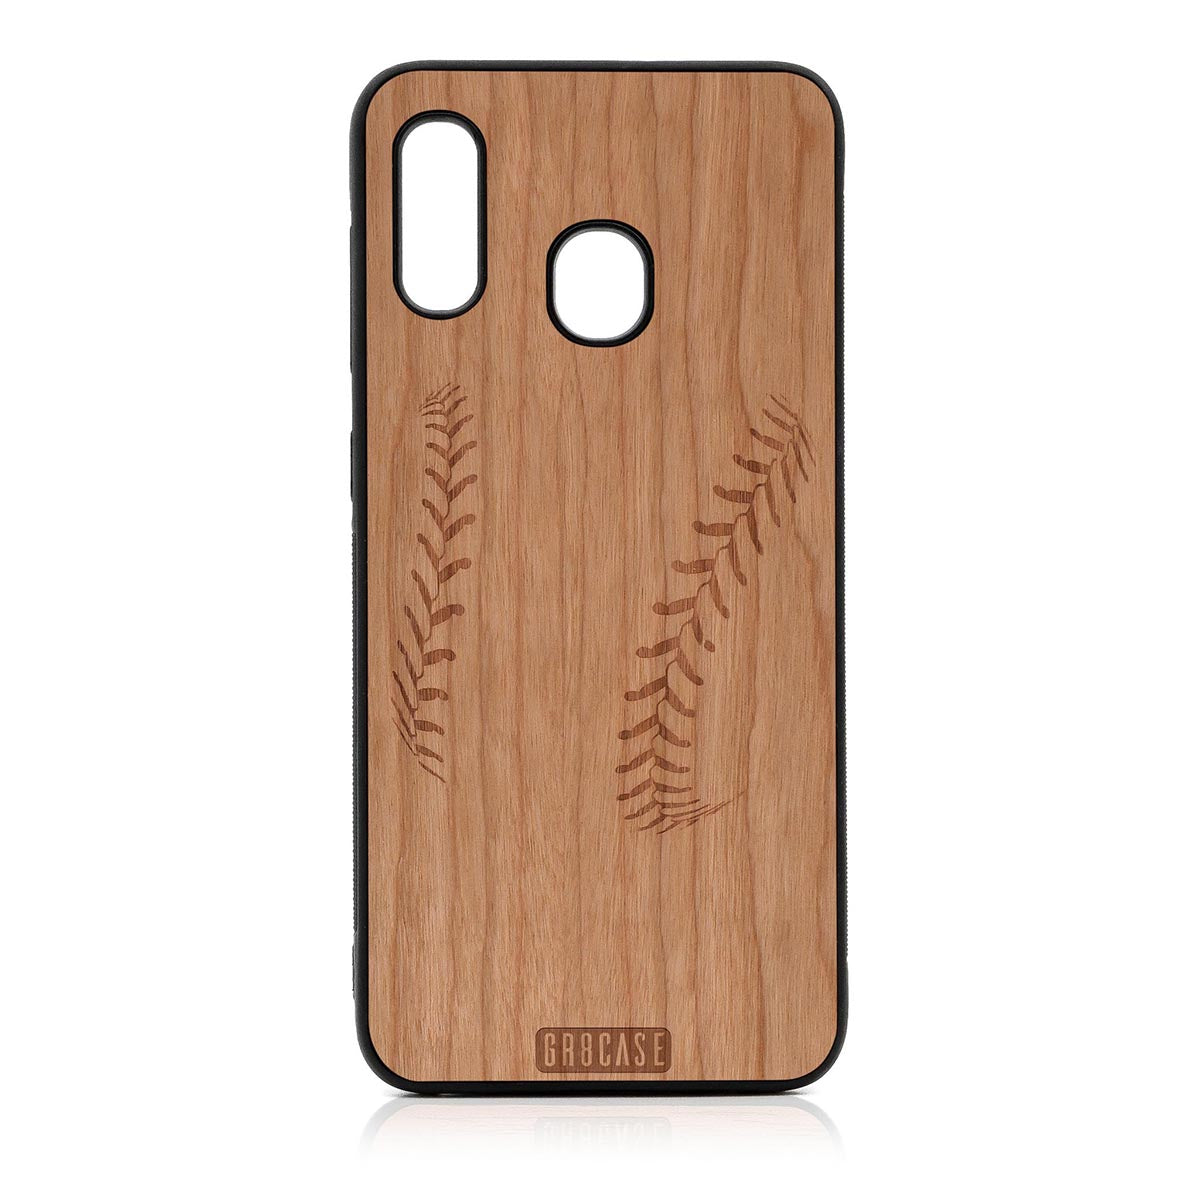 Baseball Stitches Design Wood Case For Samsung Galaxy A20 by GR8CASE